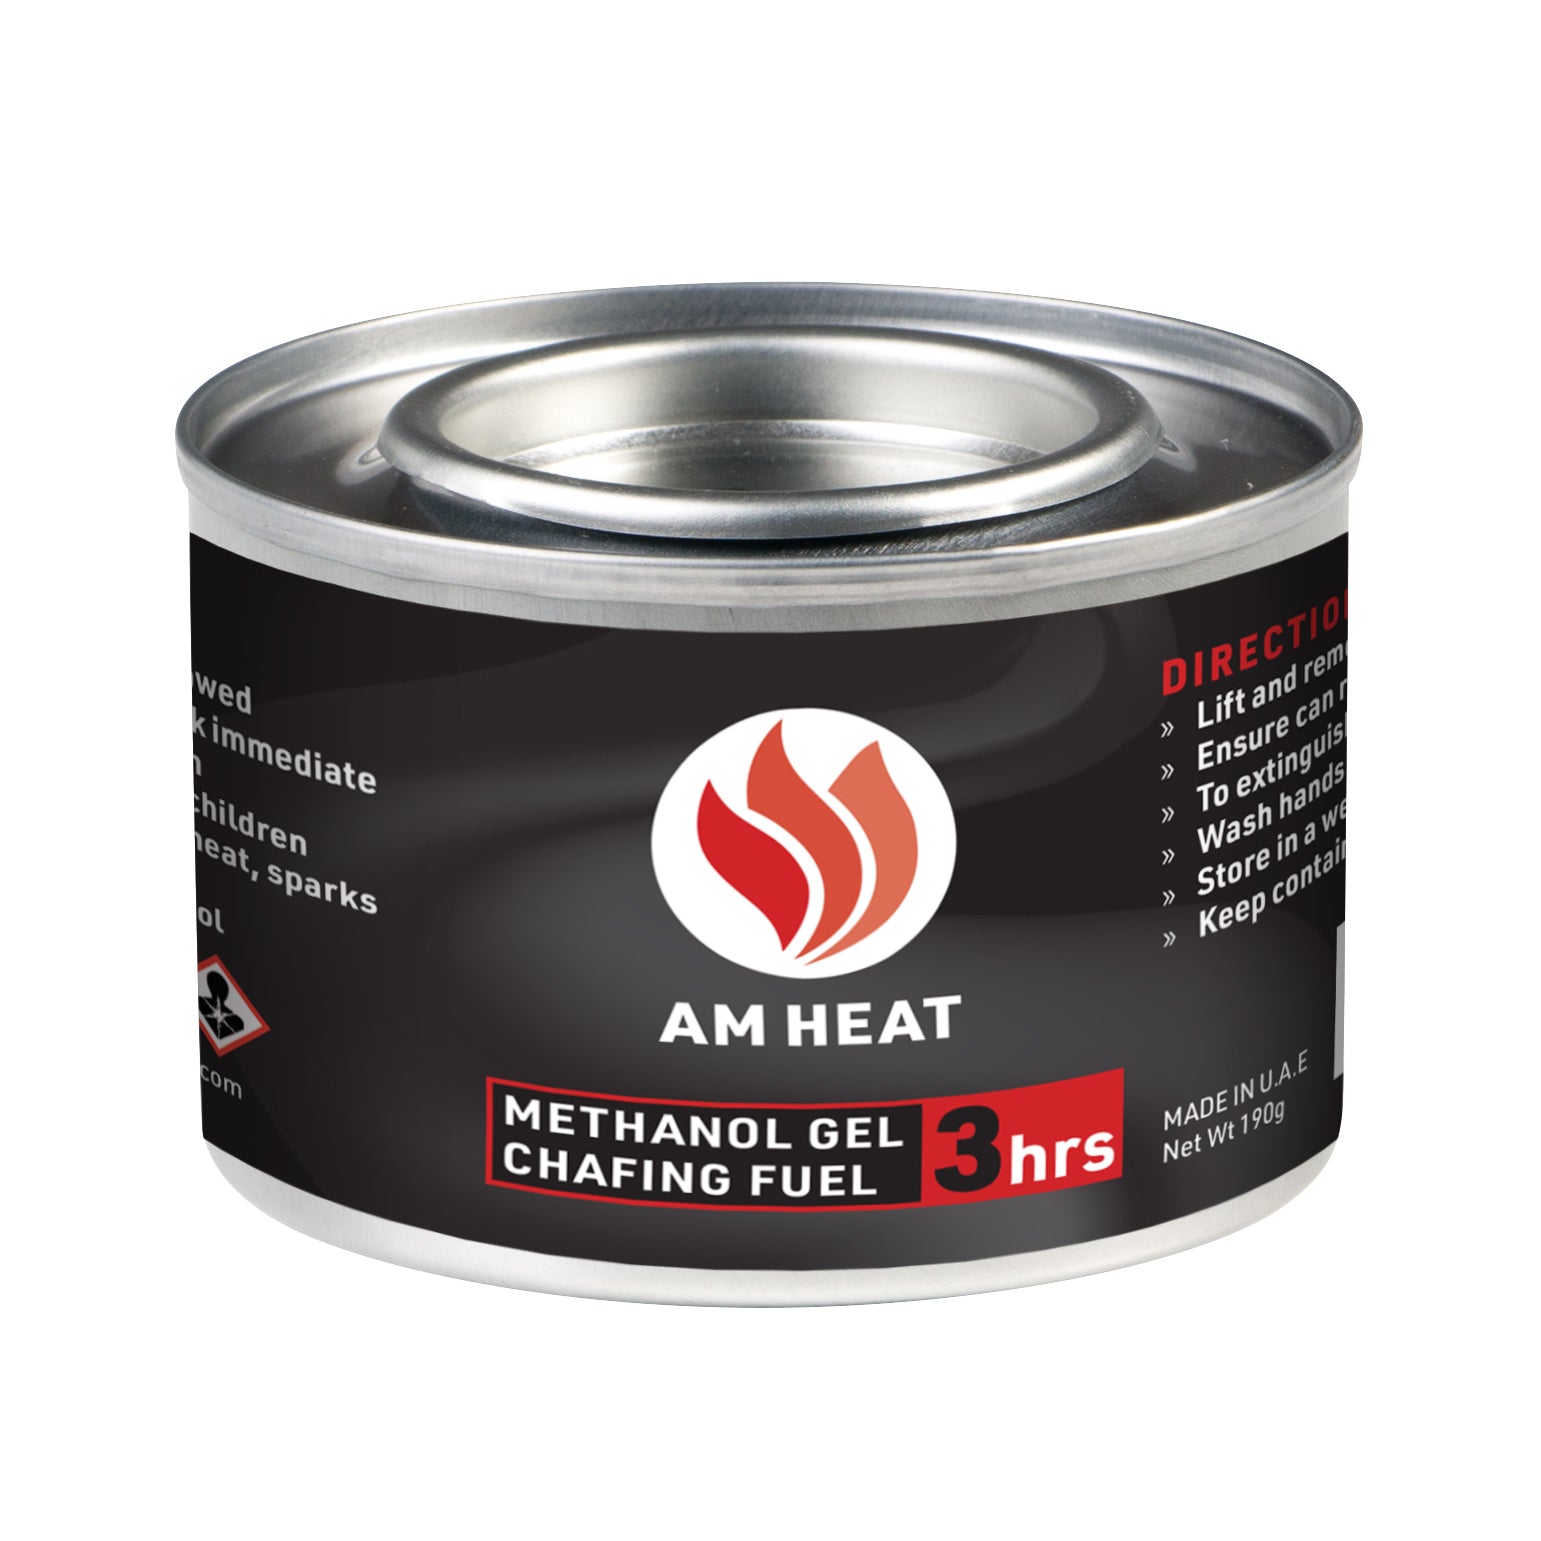 Chafer Fuel for Food Heating